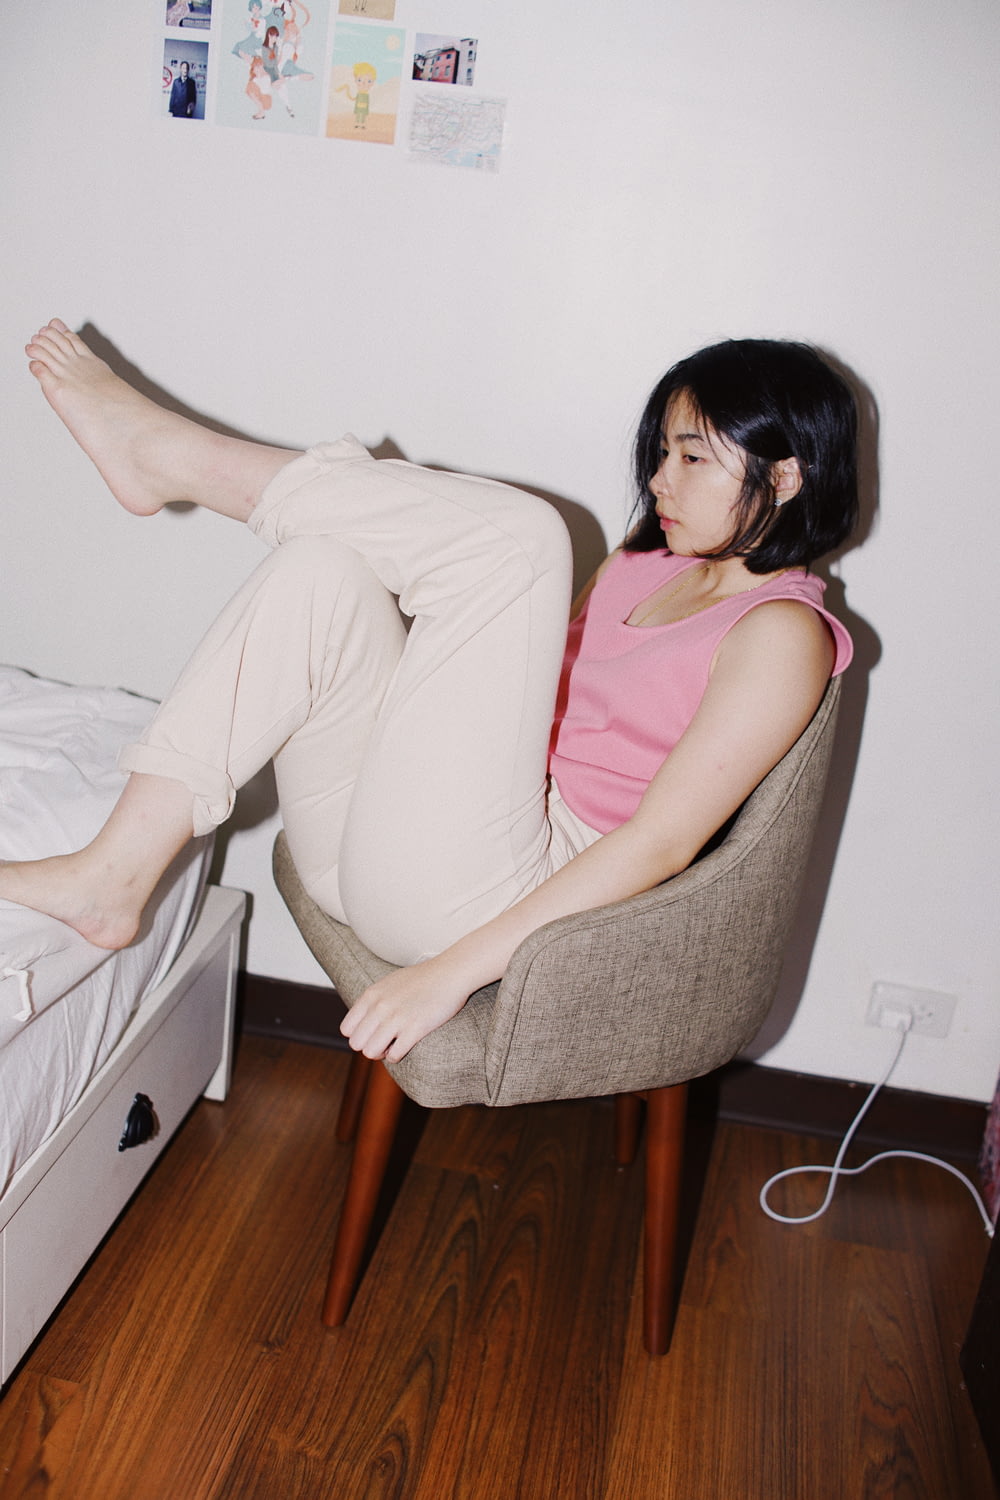 girl sitting on chair in room